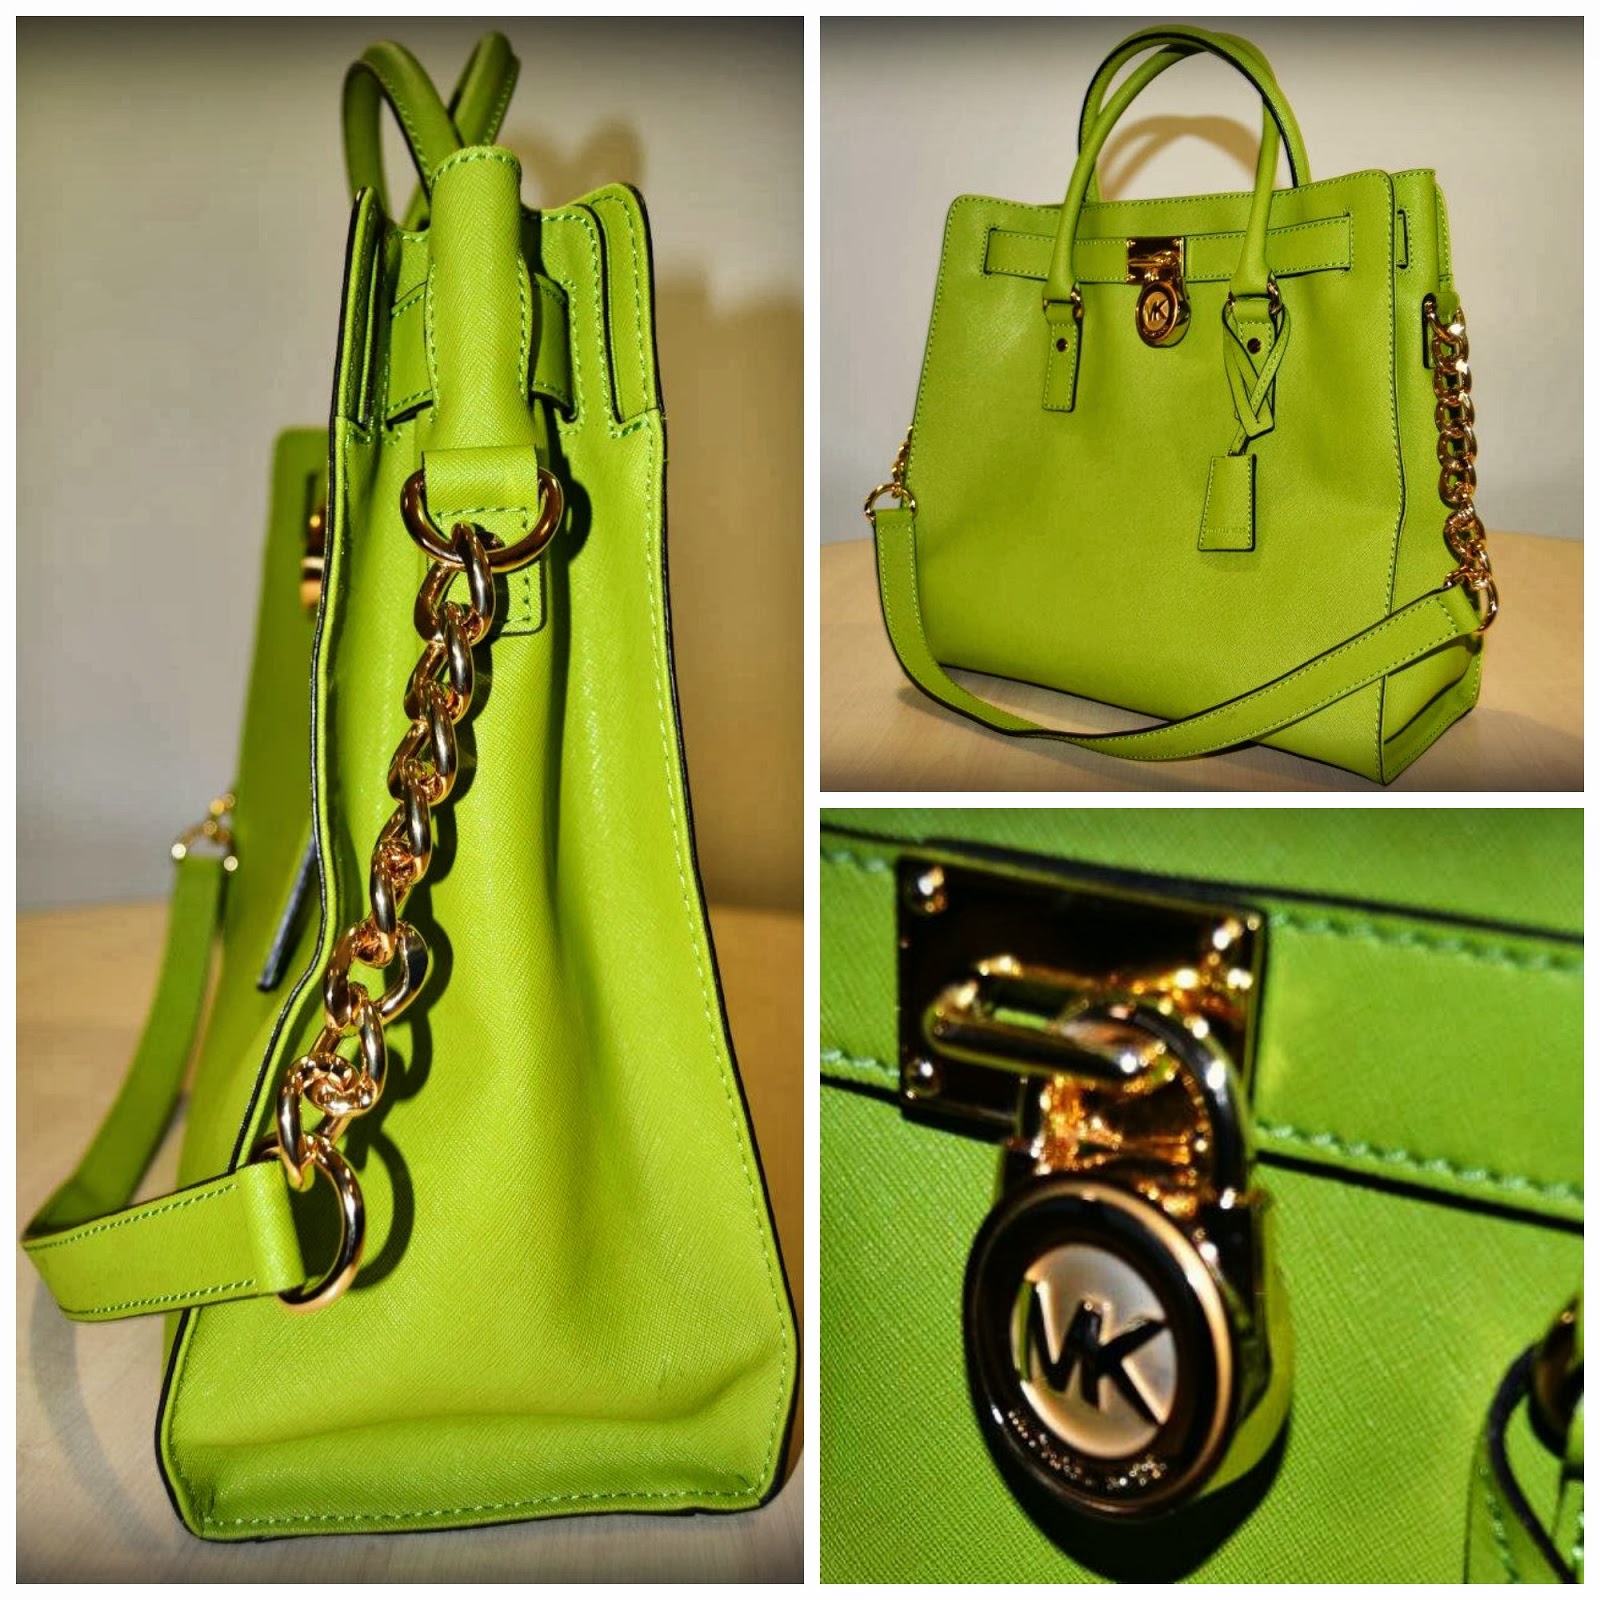 PRODUCT REVIEW: Michael Kors Large Hamilton Saffiano Tote | STYLED INTO  FASHION